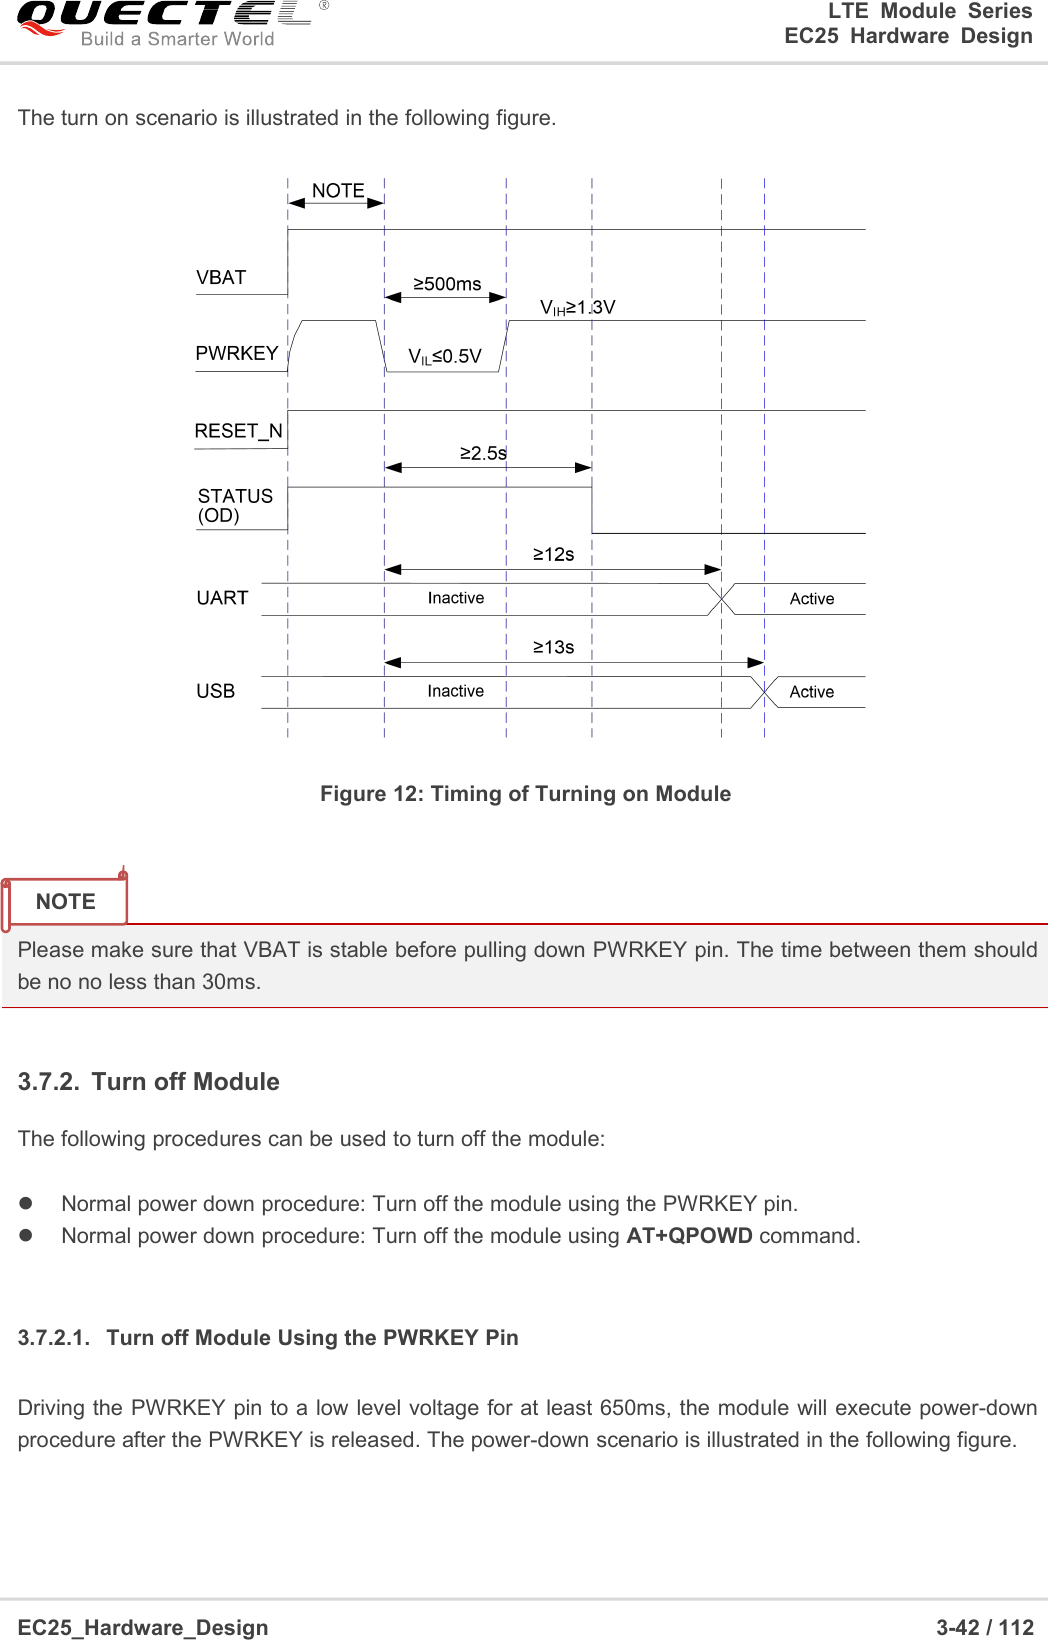 LTE Module SeriesEC25 Hardware DesignEC25_Hardware_Design 3-42 / 112The turn on scenario is illustrated in the following figure.Figure 12: Timing of Turning on ModulePlease make sure that VBAT is stable before pulling down PWRKEY pin. The time between them shouldbe no no less than 30ms.3.7.2. Turn off ModuleThe following procedures can be used to turn off the module:Normal power down procedure: Turn off the module using the PWRKEY pin.Normal power down procedure: Turn off the module using AT+QPOWD command.3.7.2.1. Turn off Module Using the PWRKEY PinDriving the PWRKEY pin to a low level voltage for at least 650ms, the module will execute power-downprocedure after the PWRKEY is released. The power-down scenario is illustrated in the following figure.NOTE